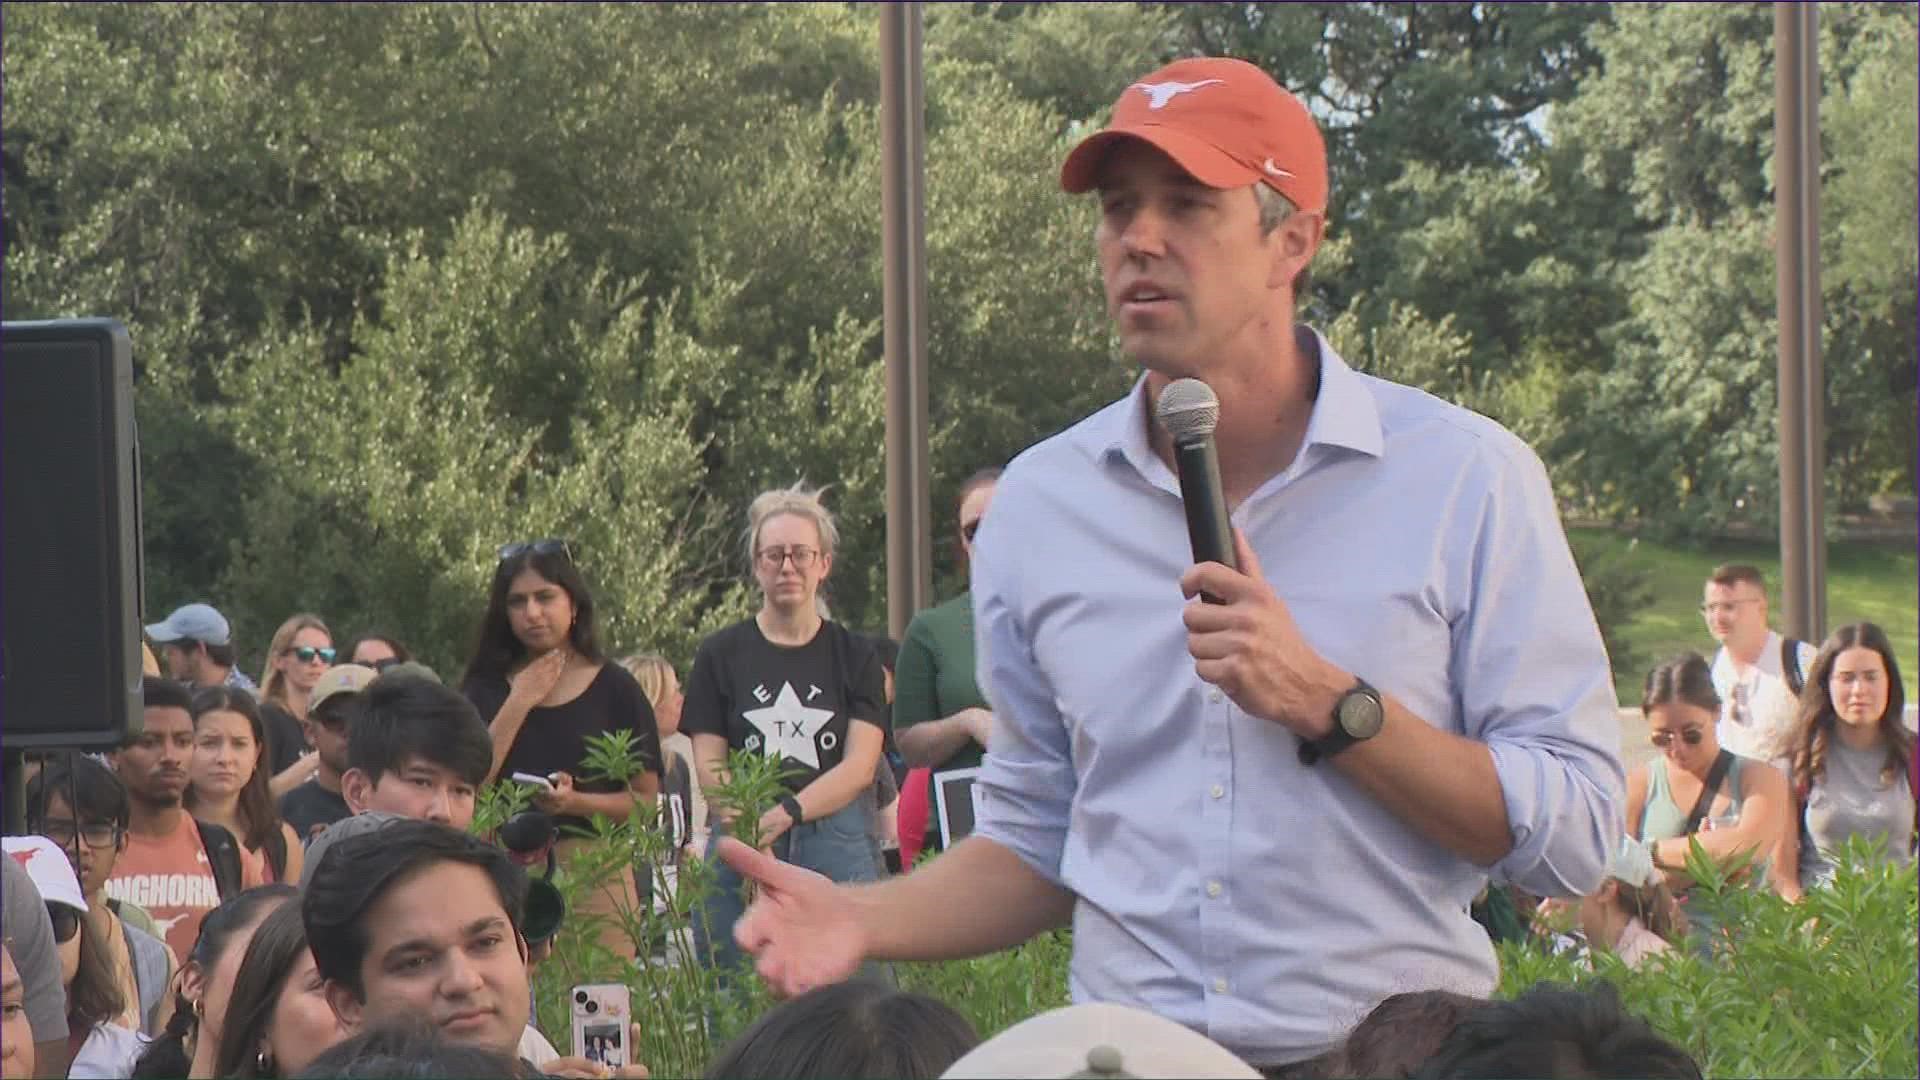 Texas gubernatorial candidate Beto O'Rourke launched his "college tour" across the state at UT Austin Monday morning.